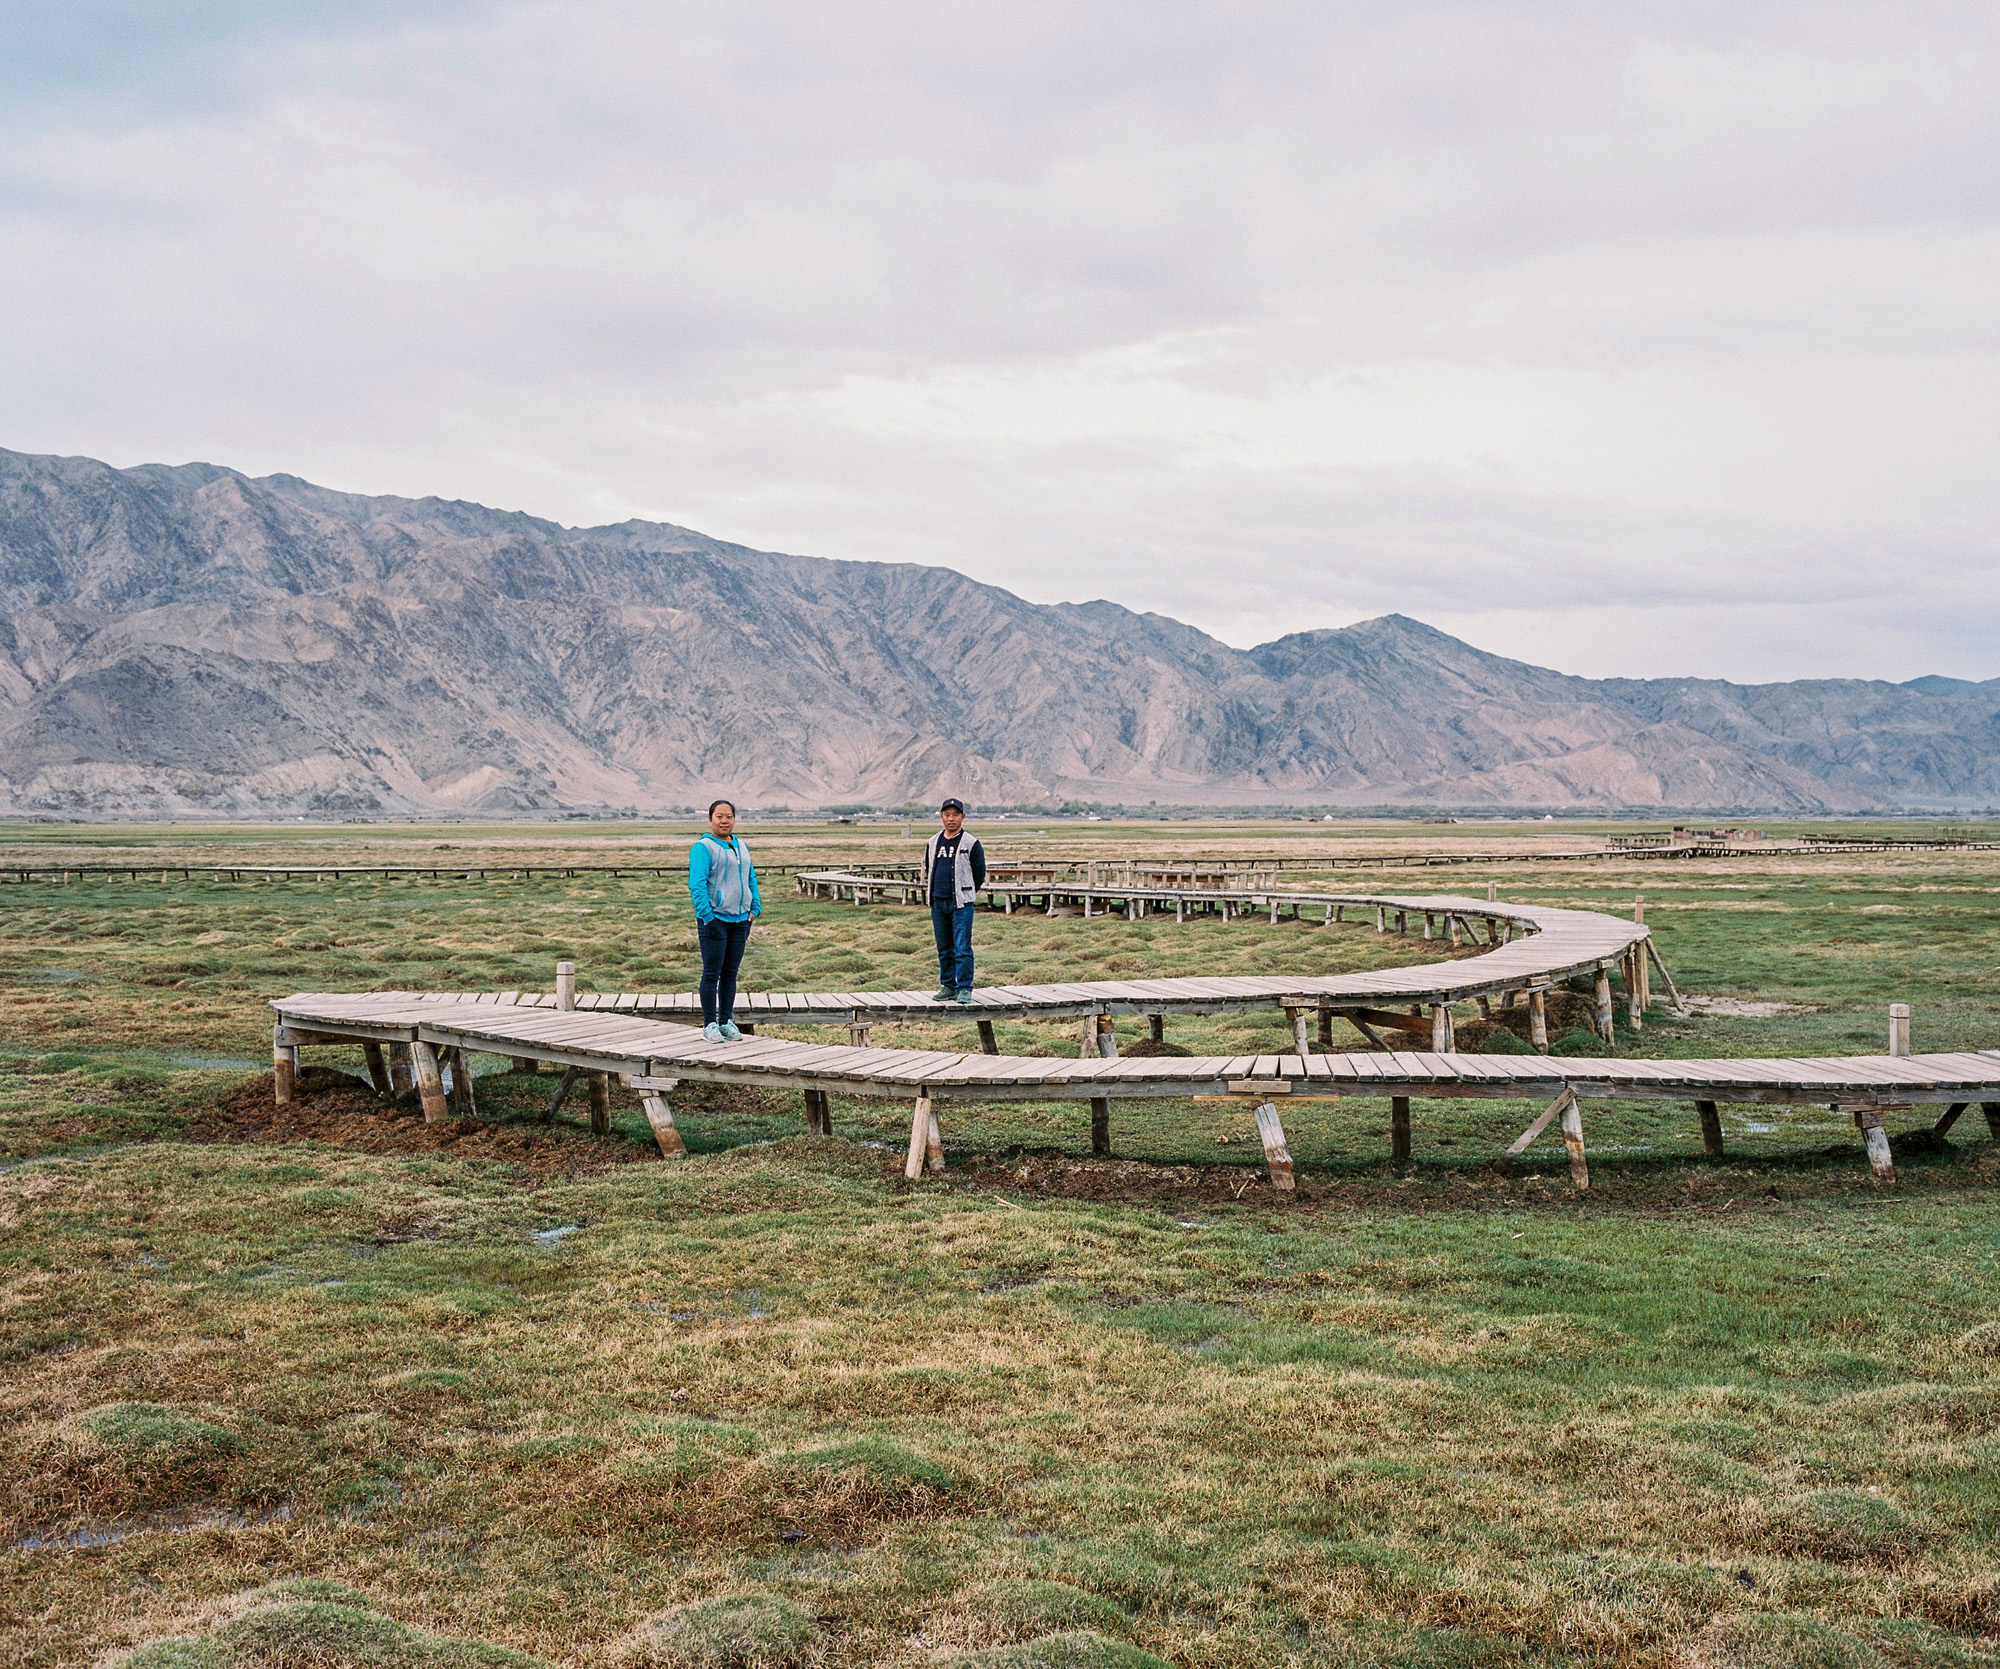 A Han Chinese couple living and working in Tashkurgan posing on the Wetlands in Tashkurgan Tajik Autonomous County in Xinjiang at the border with Tajikistan. He is from Kashgar but they have met in Tashkurgan and now live there. he owns a business.